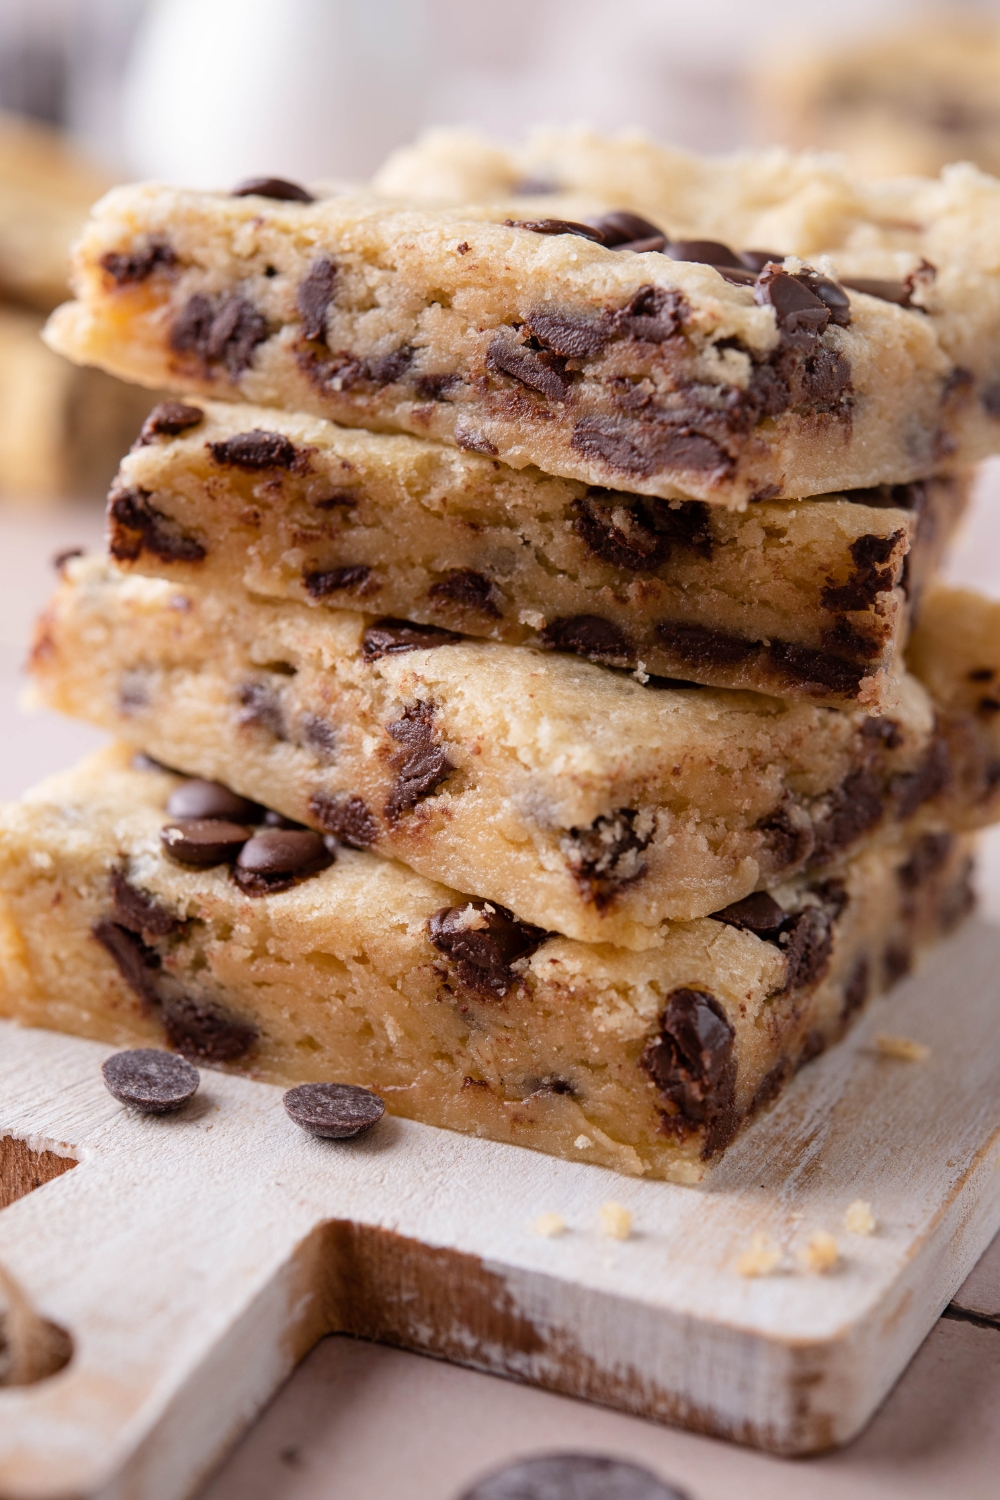 A close-up of a stack of chocolate chip cookie bars on a wooden serving board.